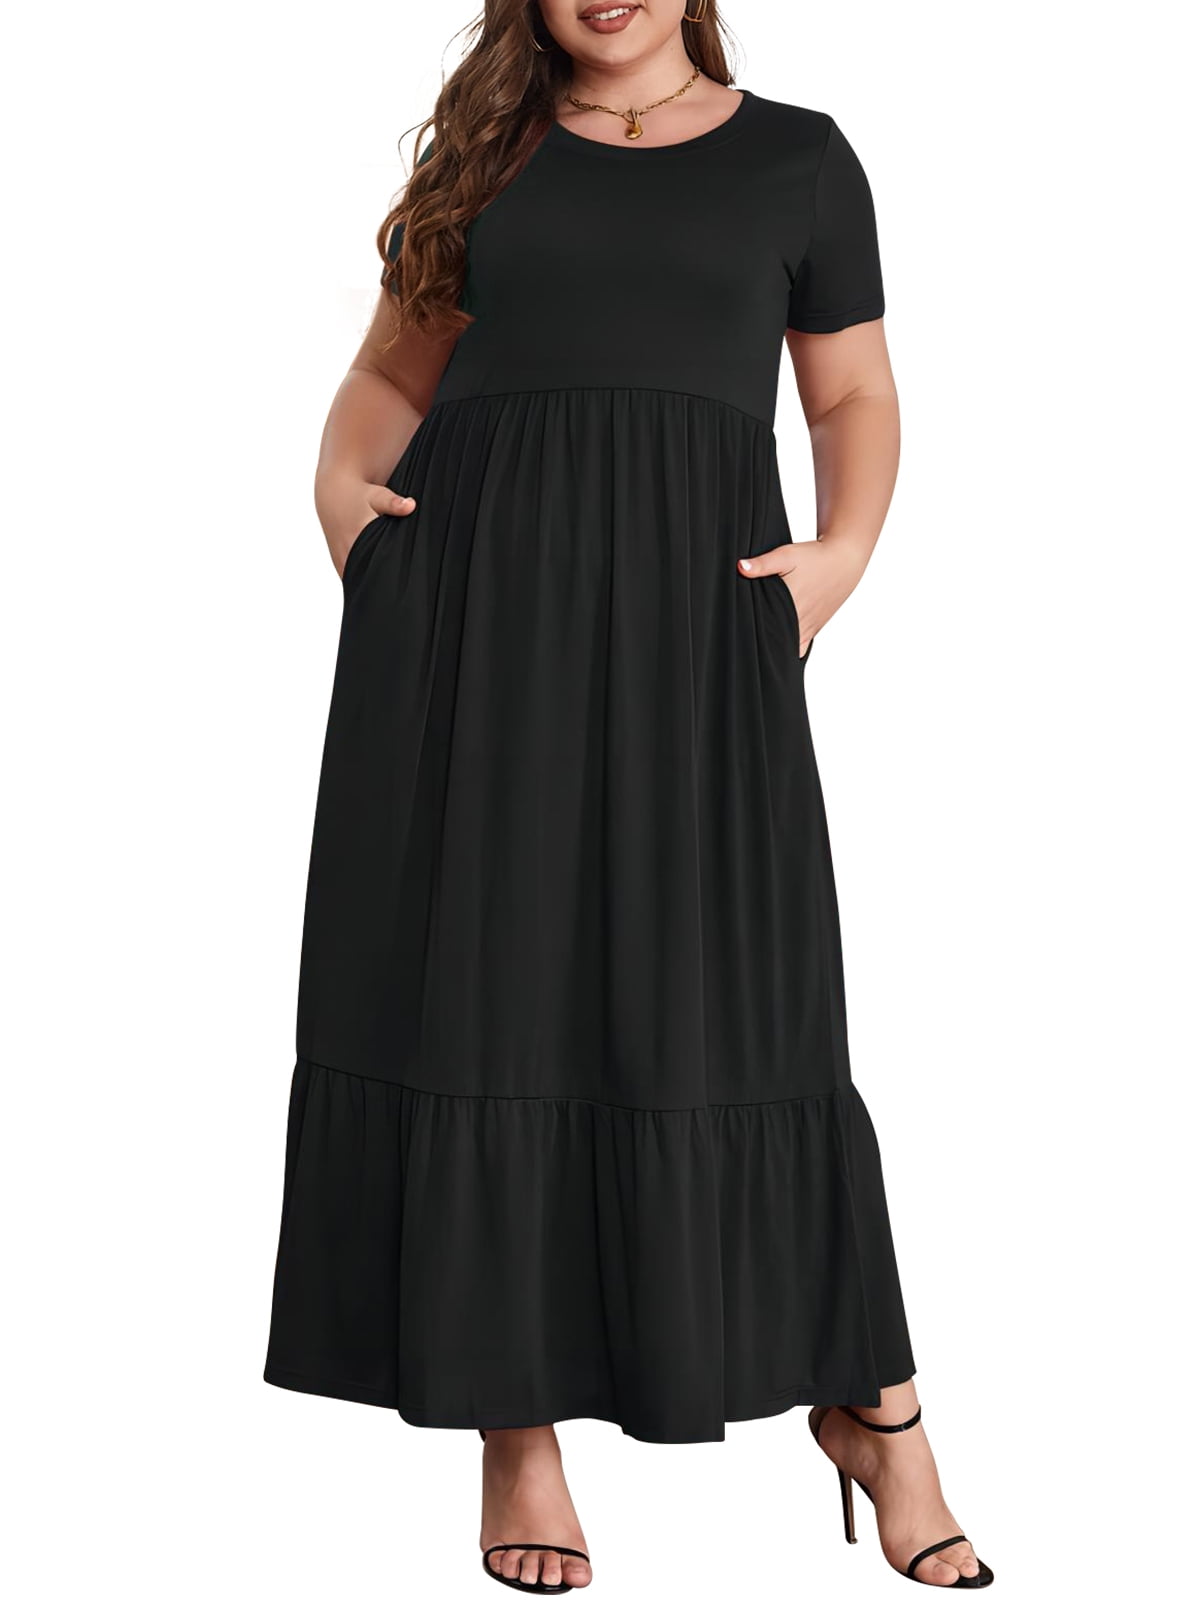 Mengpipi Women's Plus Size Casual Short Sleeve Crewneck Dress Flowy Tiered Loose Maxi Dress with Pockets Black 1X-5X - image 1 of 4